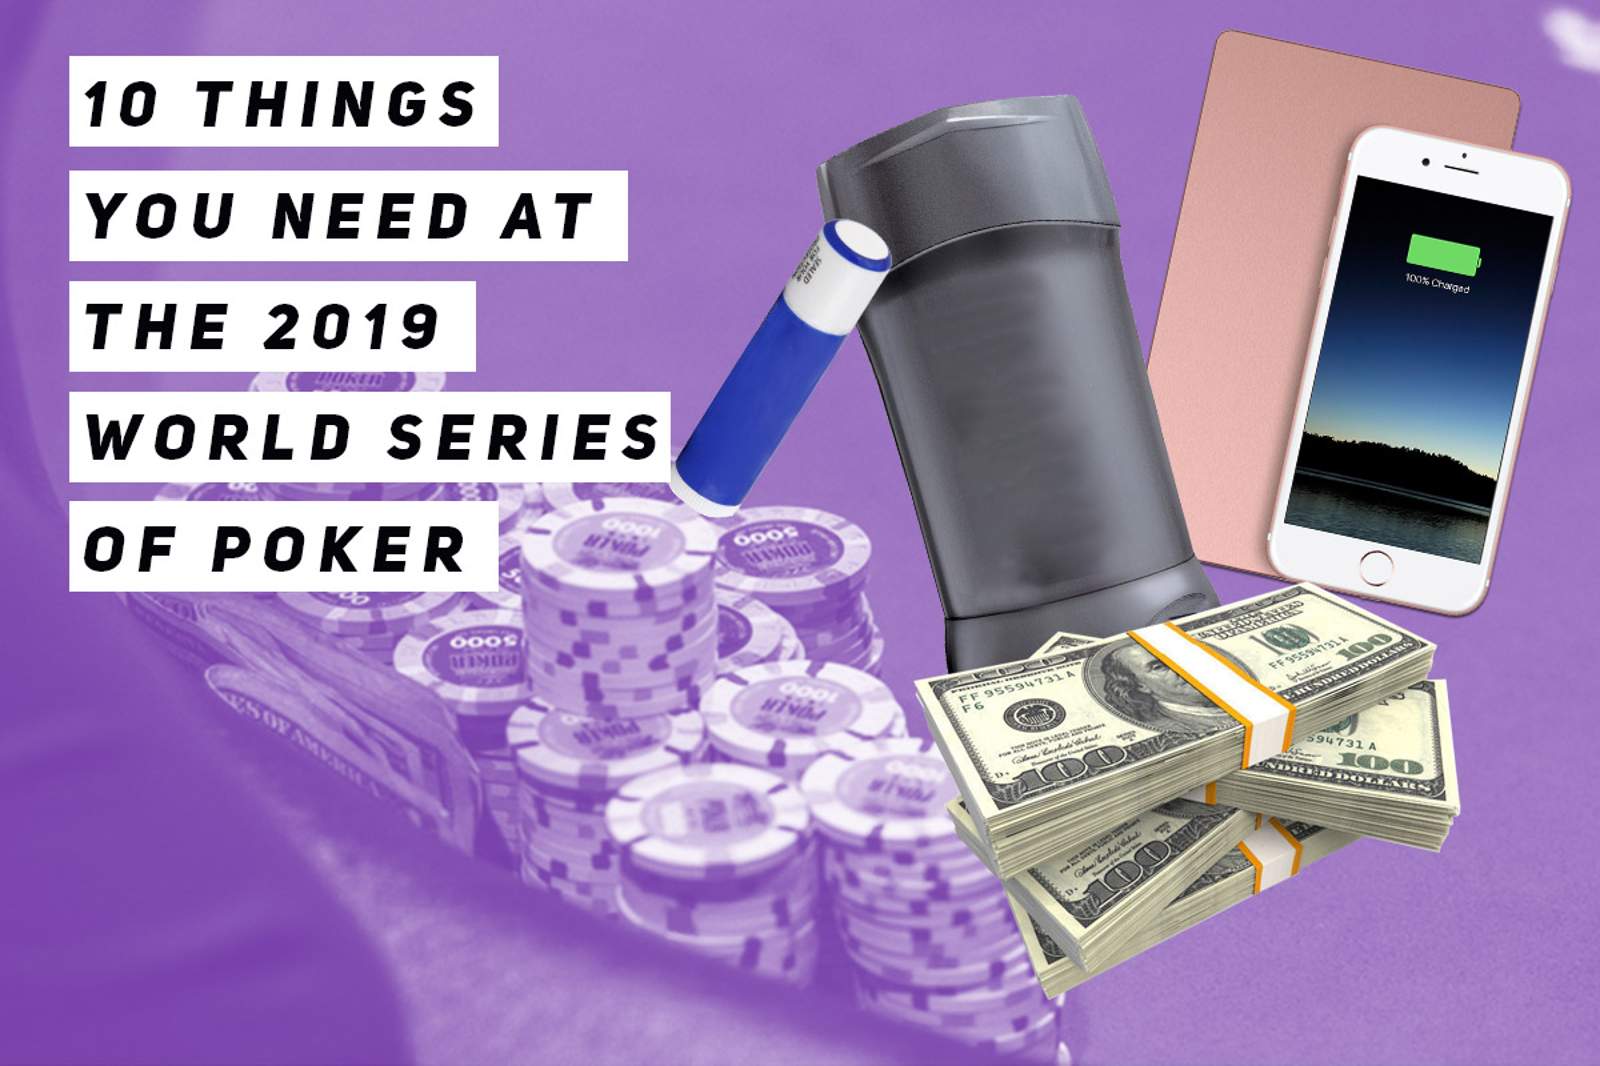 10 Things You Need at the 2019 World Series of Poker